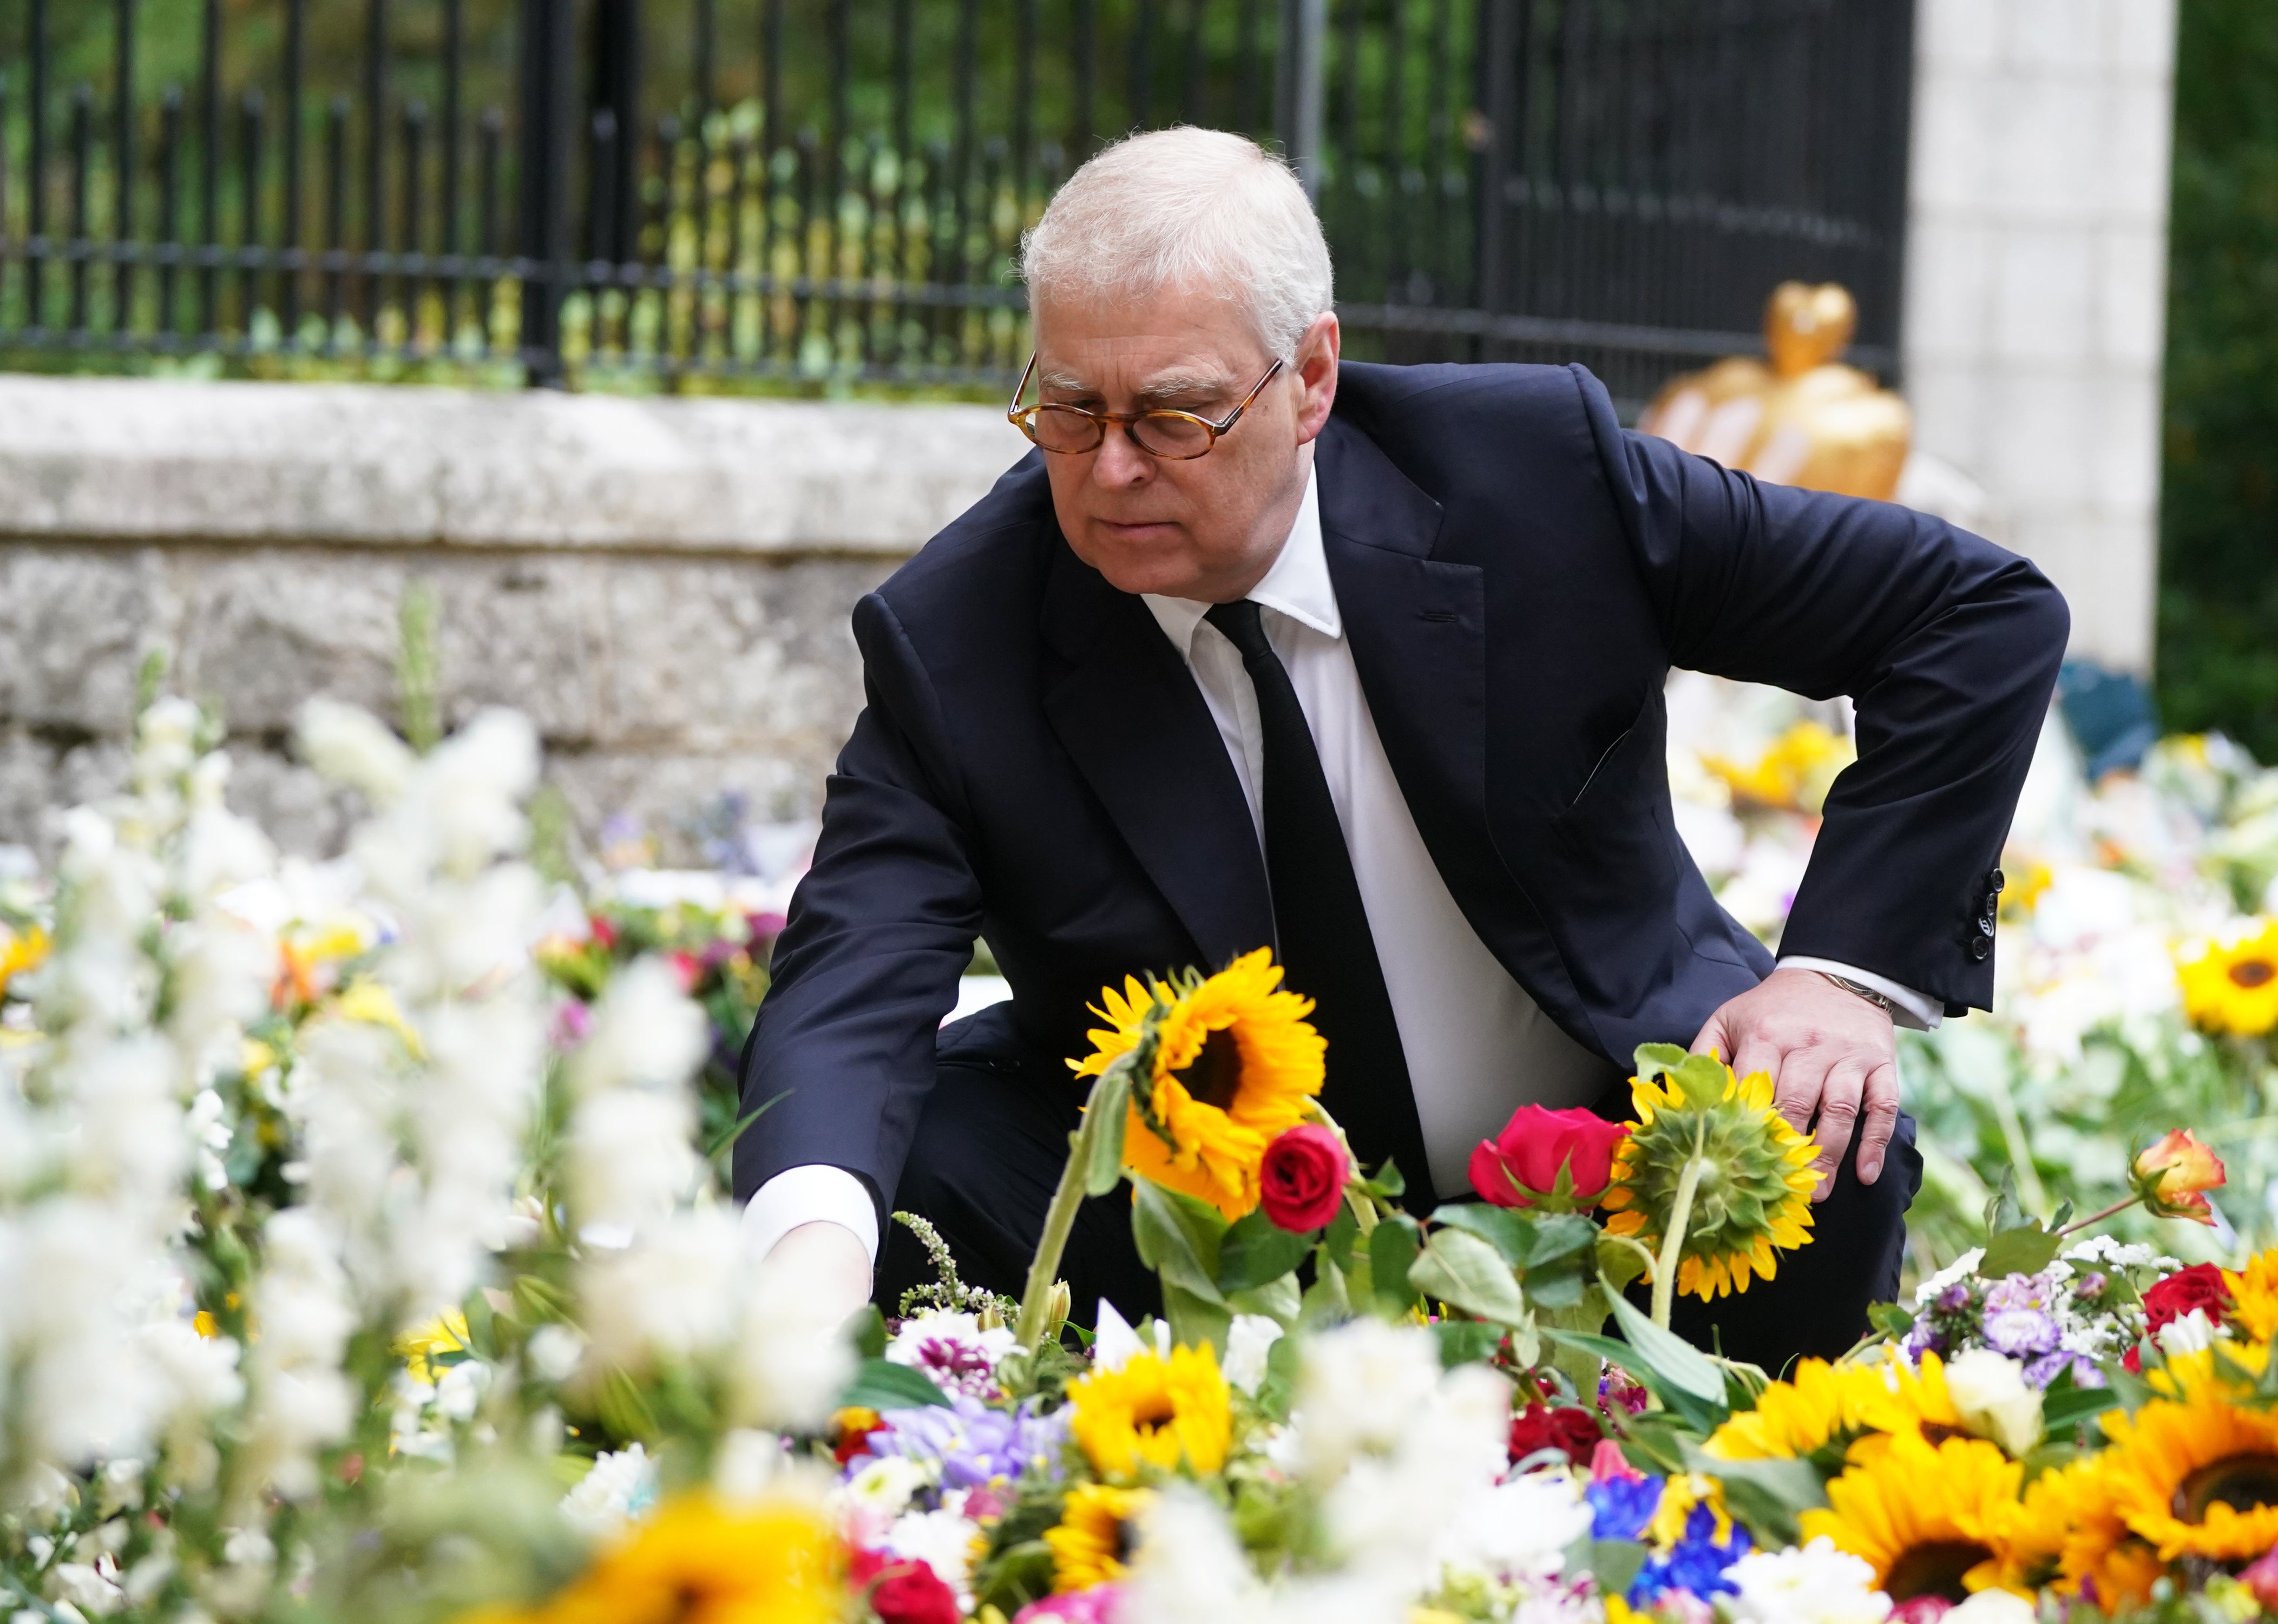 The Duke of York views the messages and floral tributes left by members of the public at Balmoral